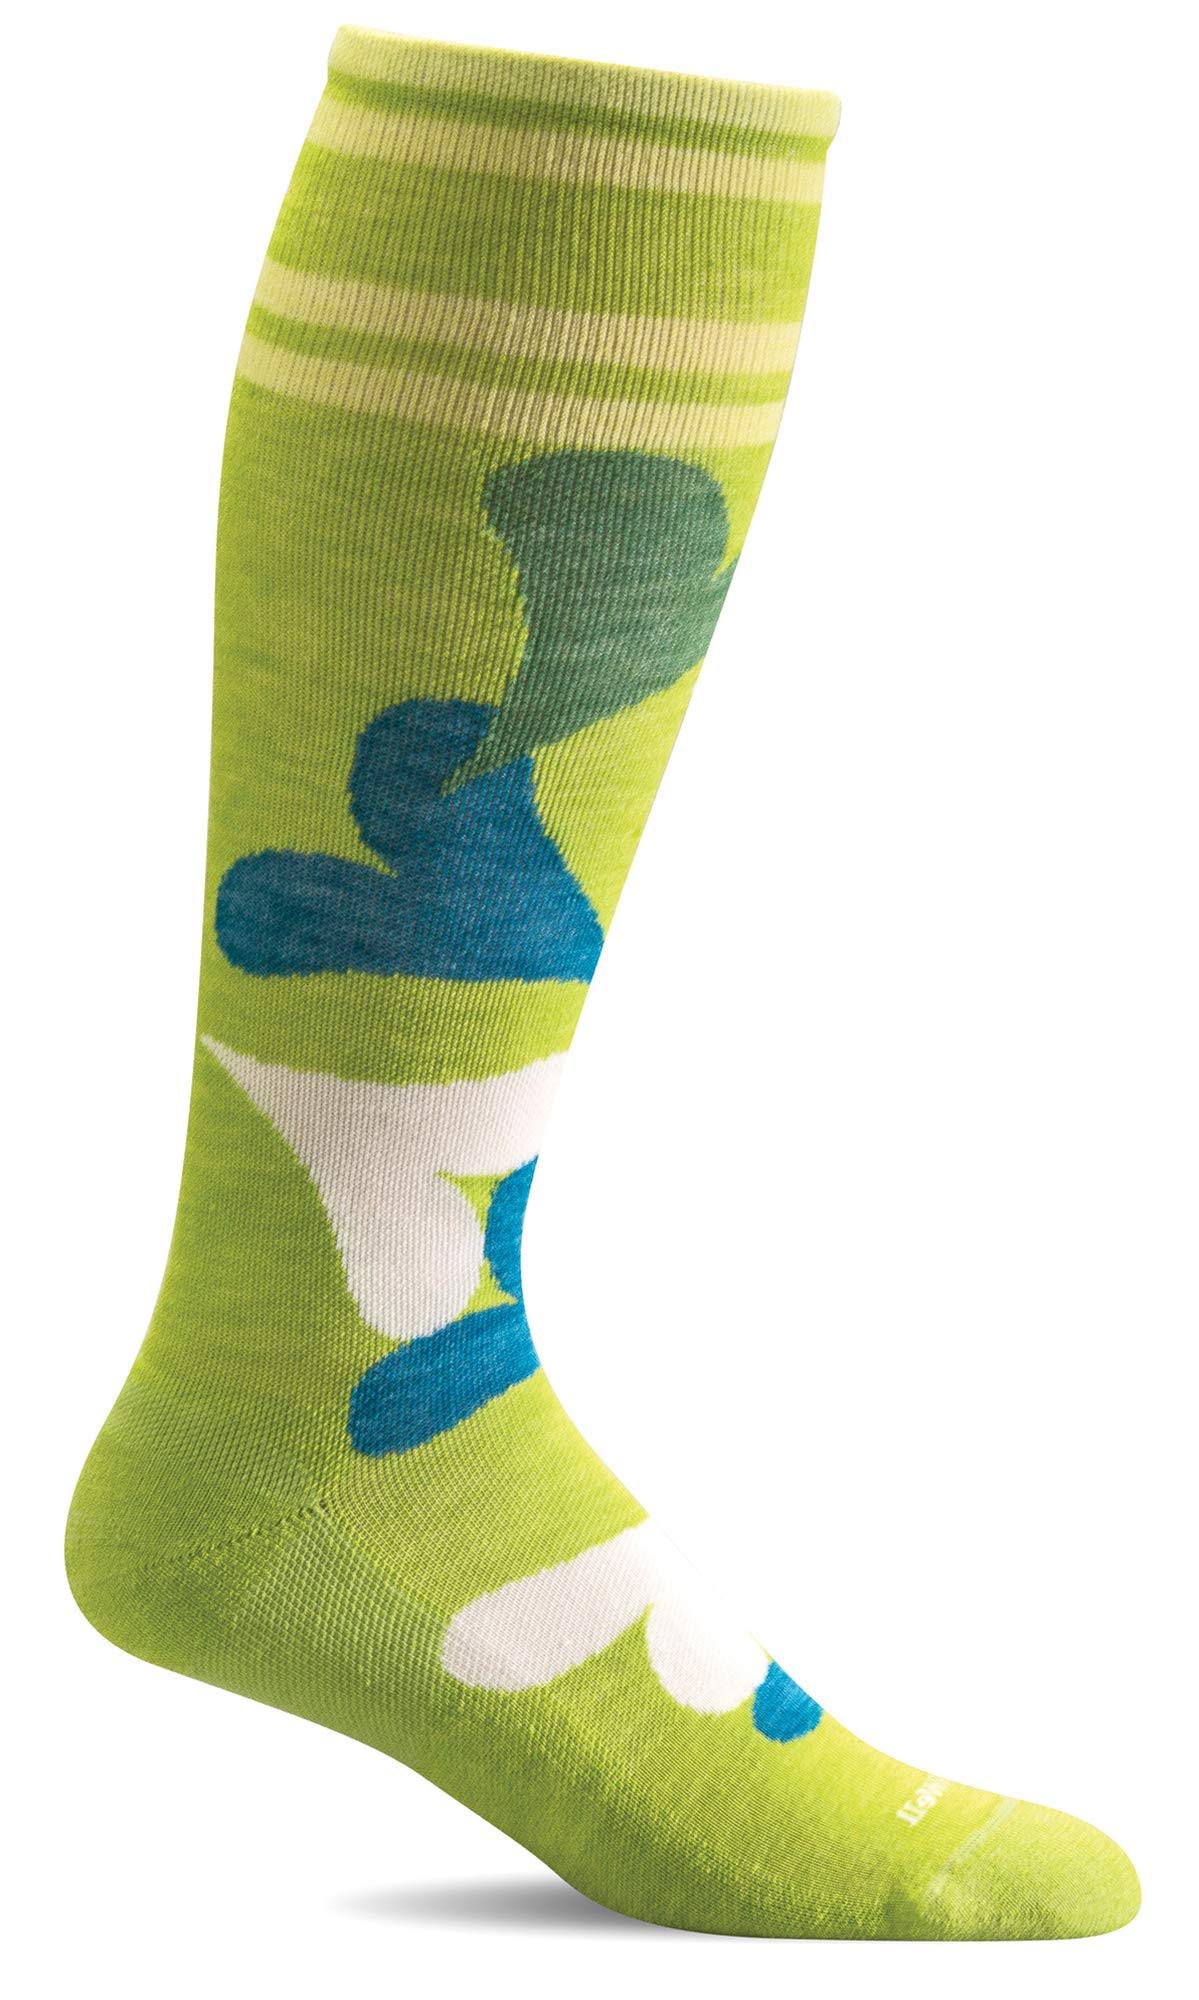 Sockwell Women's Love Lots Moderate Compression Socks (Limelight, S/M)